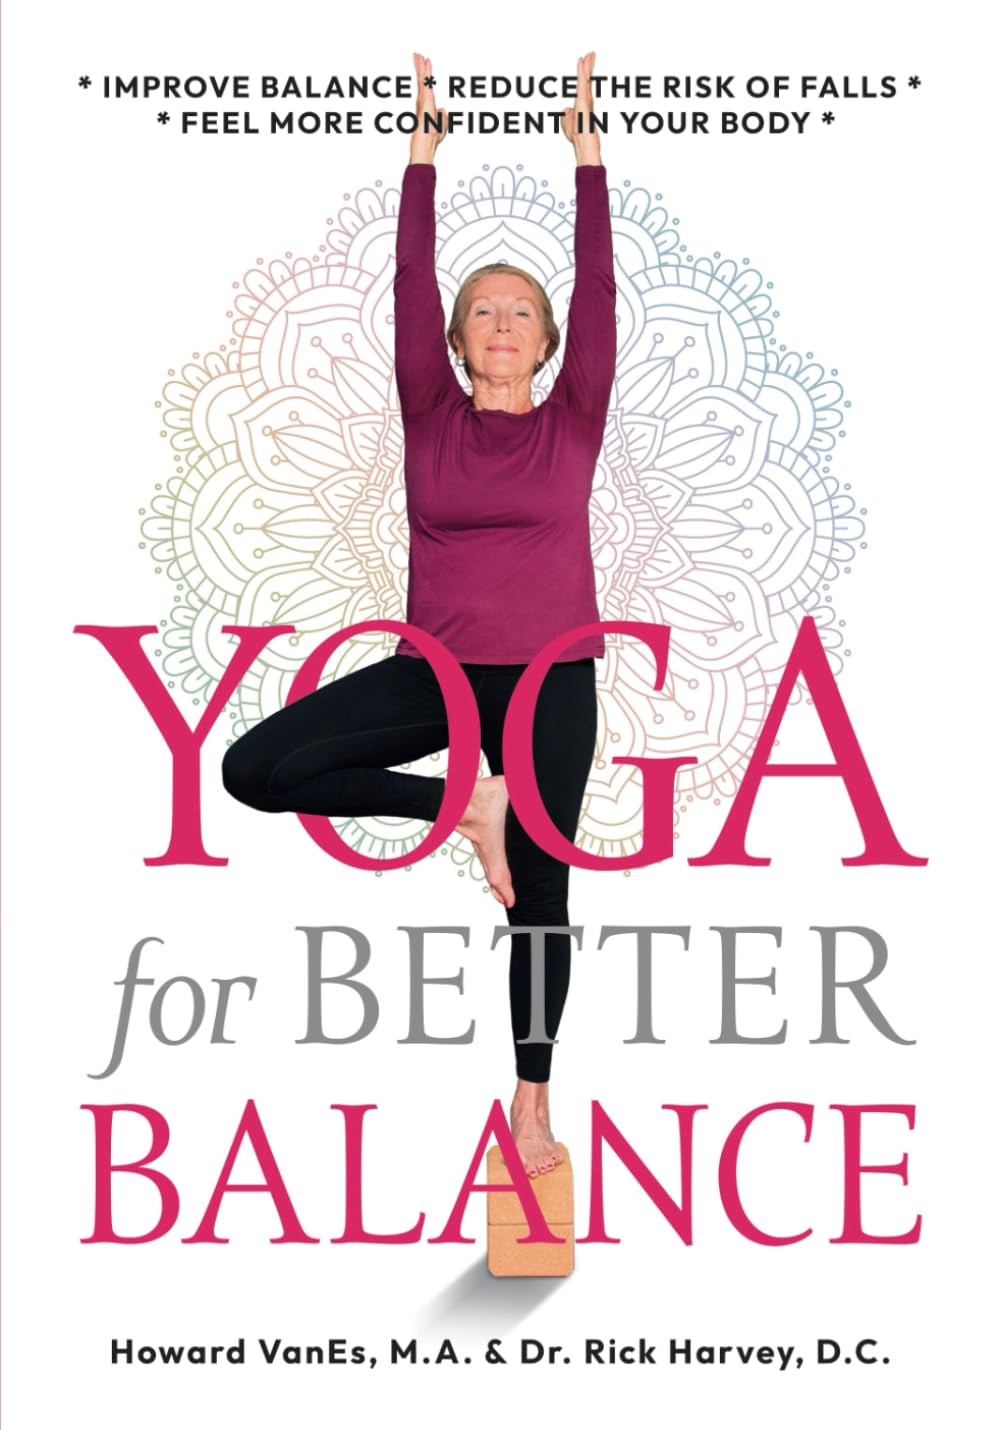 Yoga for Better Balance (VanEs and Harvey), book cover image. #yogabooks